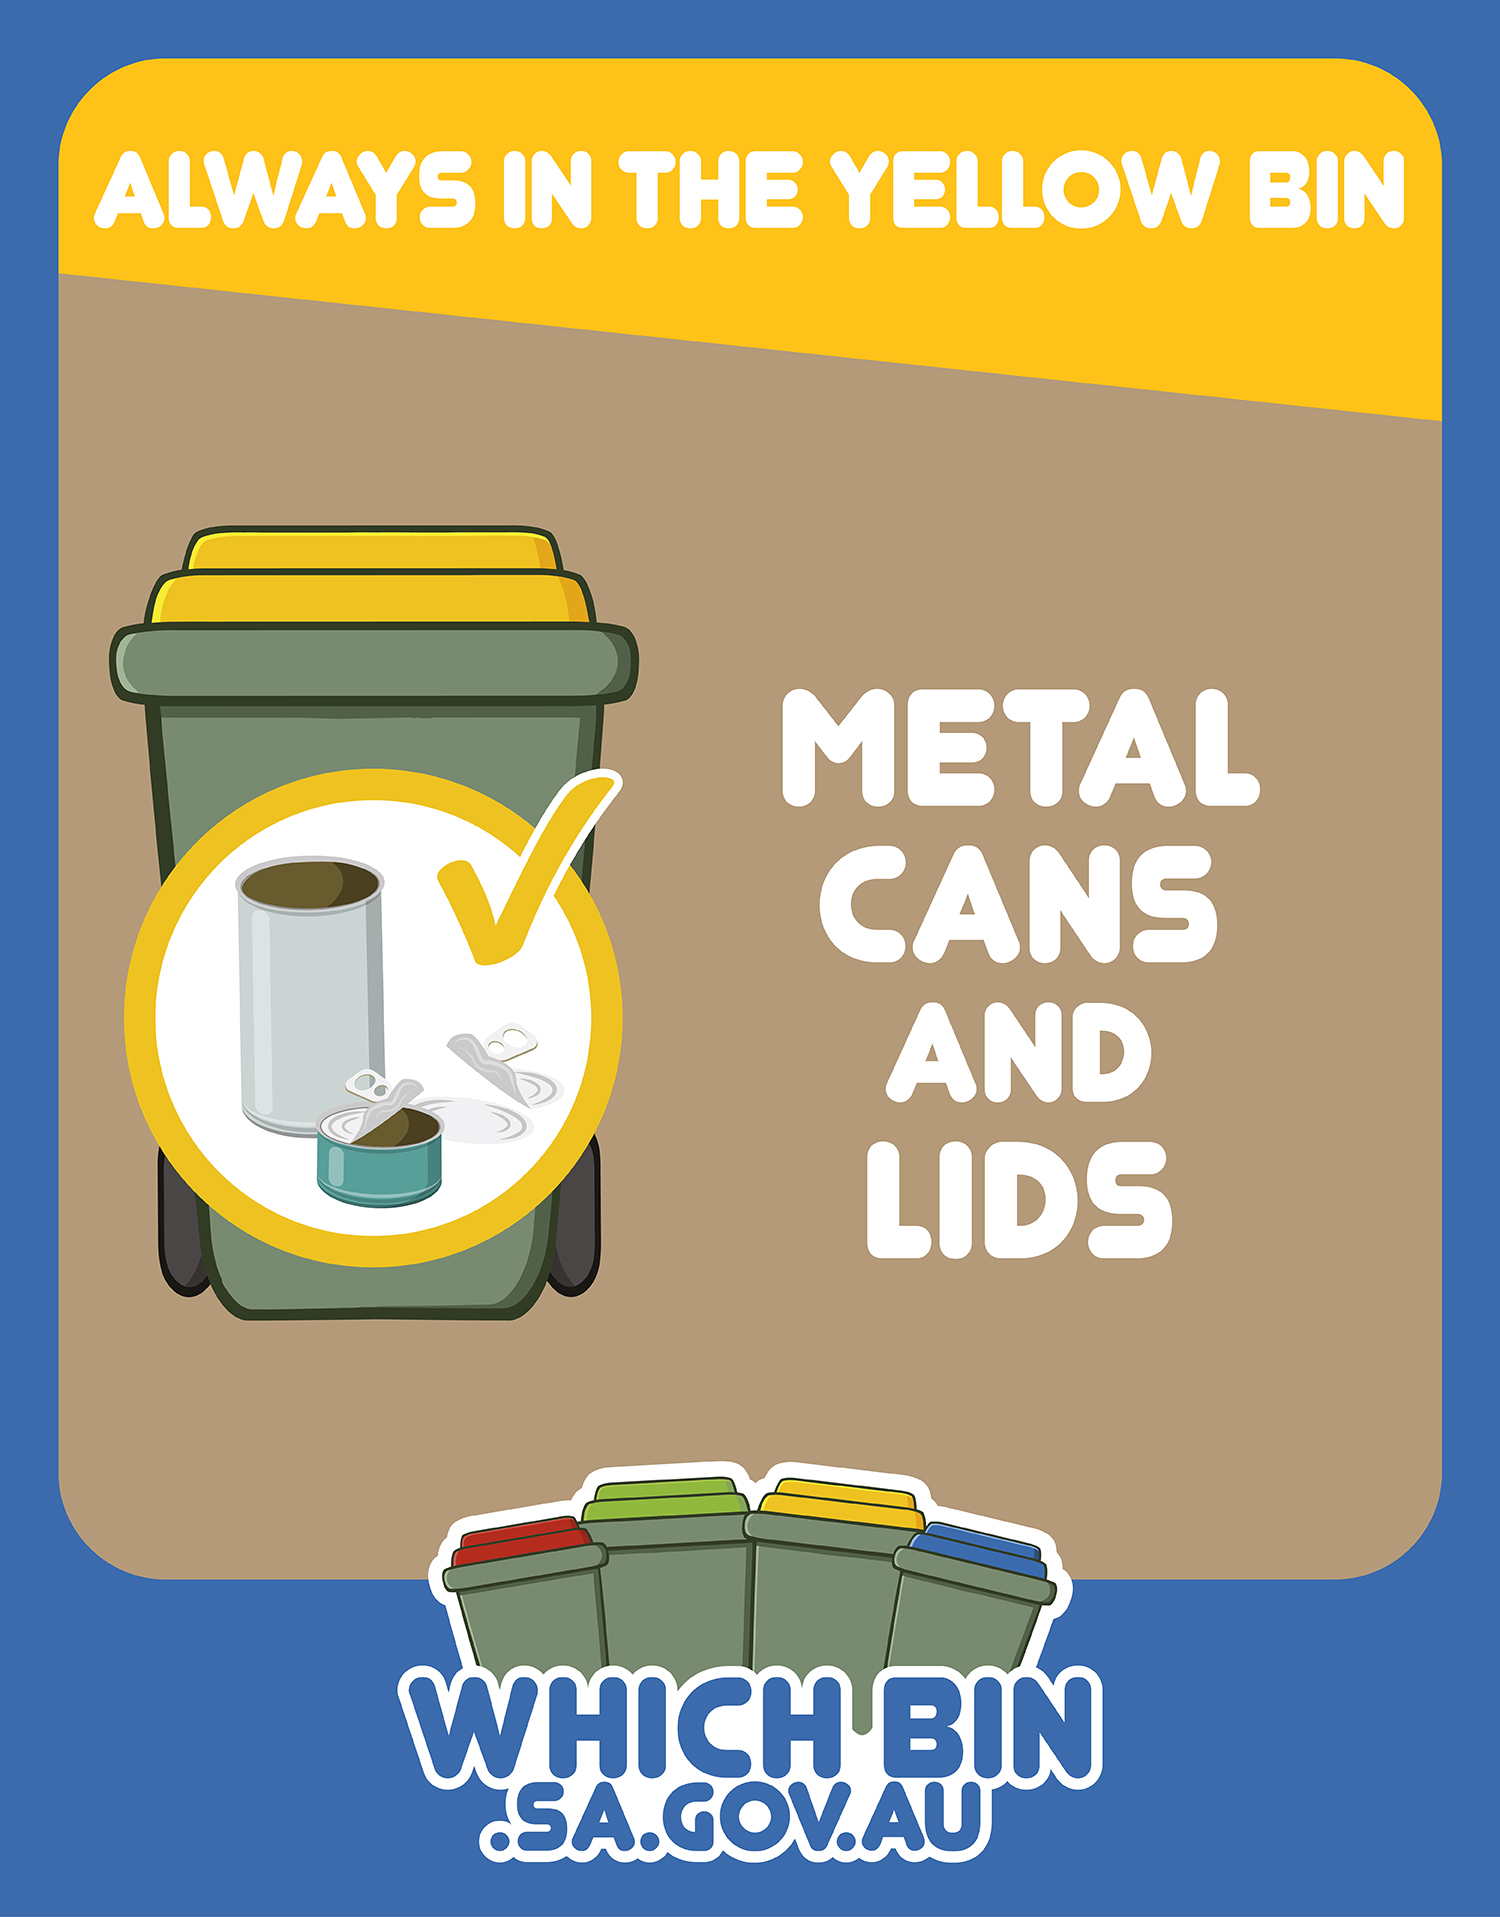 Always in the yellow bin: metal cans and lids